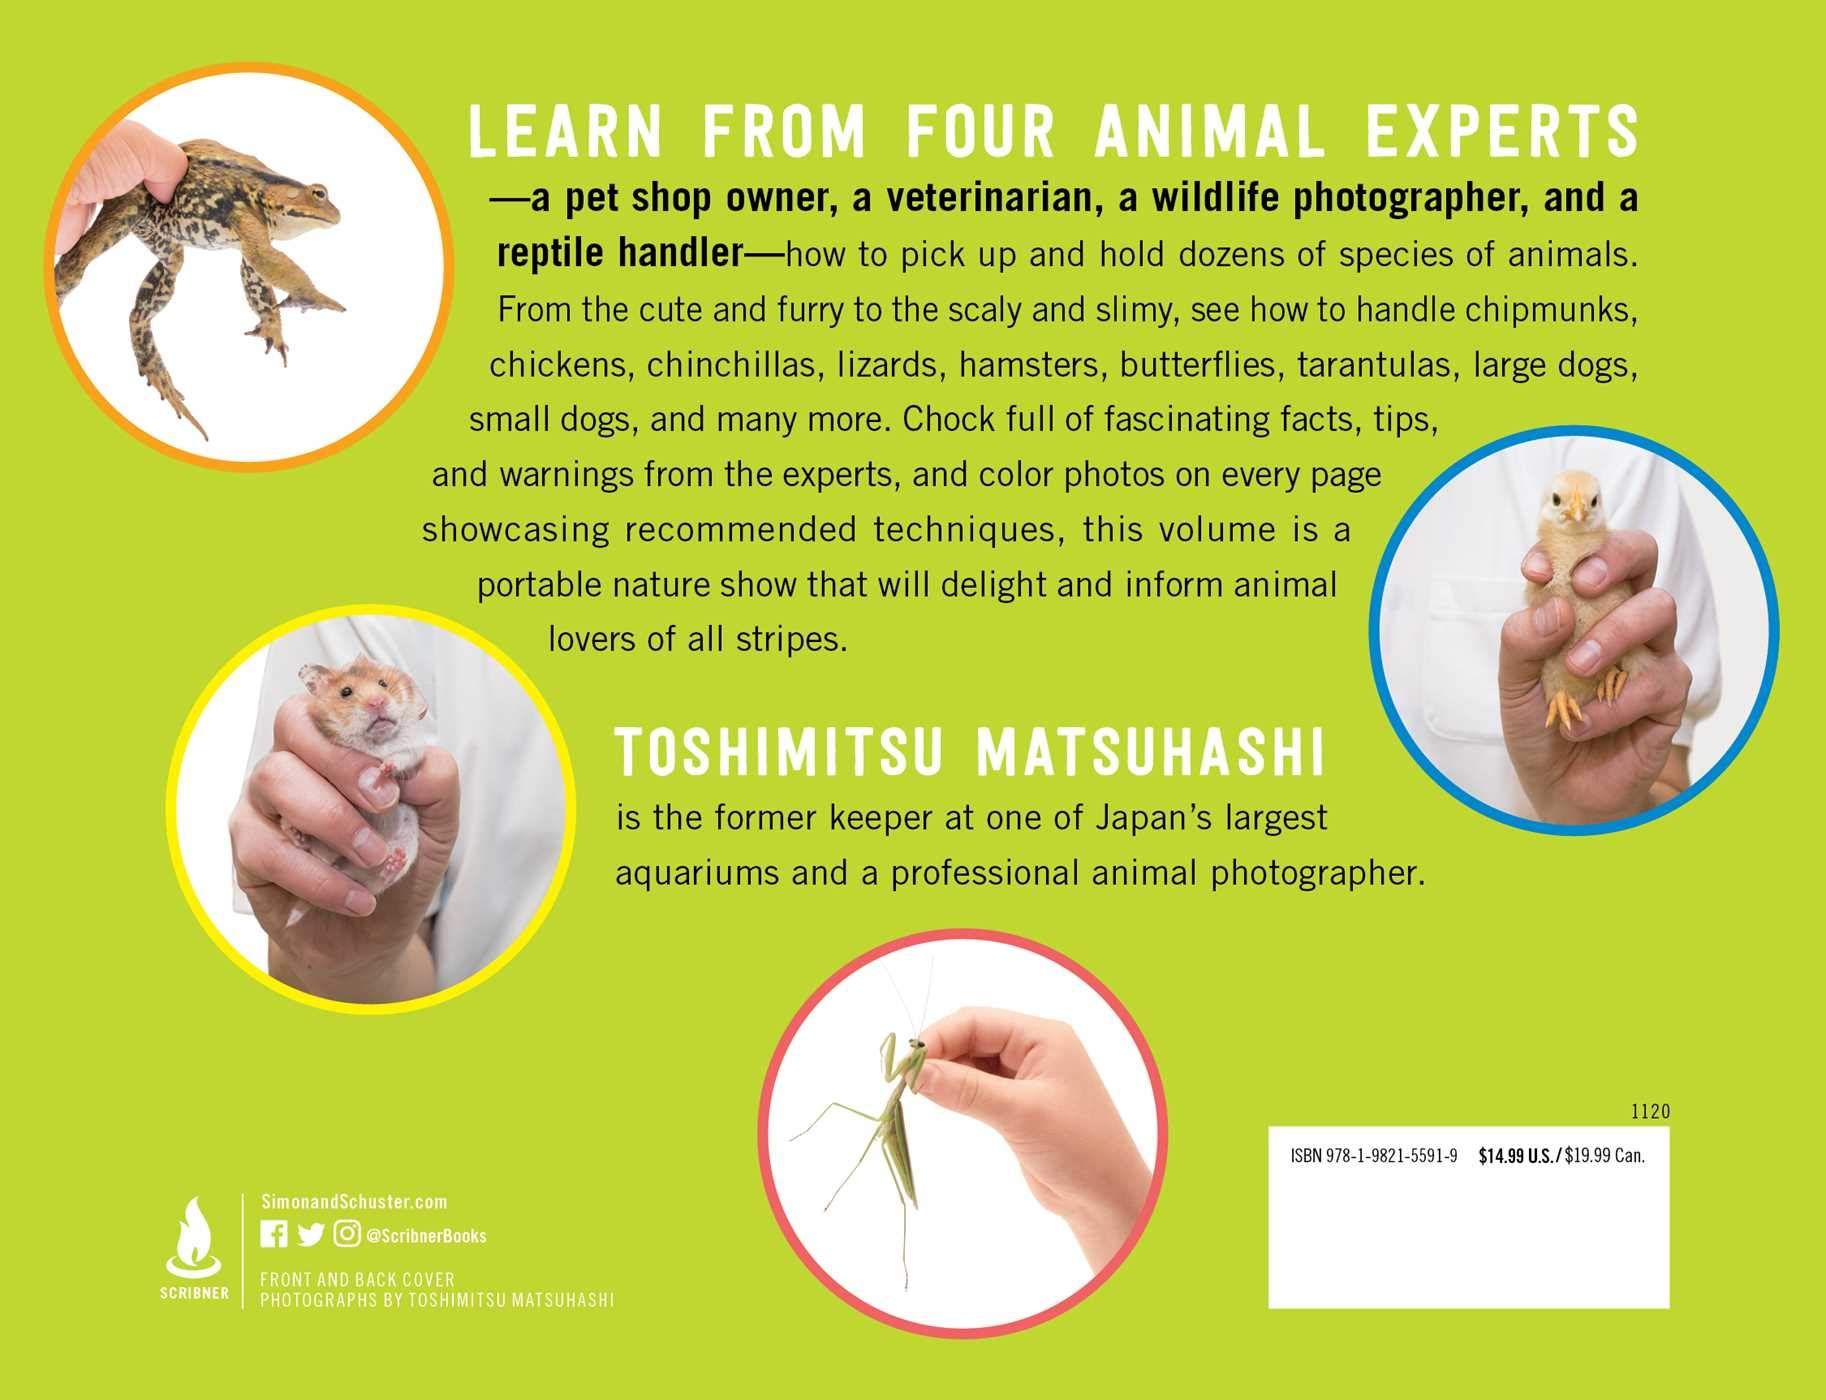 Learn from the experts—a pet shop owner, a veterinarian, a wildlife photographer, and a reptile handler—how to pick up and hold dozens of species of animals, great and small, furry, scaly, and feathery, including snails, chipmunks, chickens, chinchillas, stag beetles, lizards, hamsters, owls, grasshoppers, mice, and more. Chock full of fascinating facts, interviews with experts, and full-color photos on every page, How to Hold Animals will delight and inform animal lovers of all stripes.